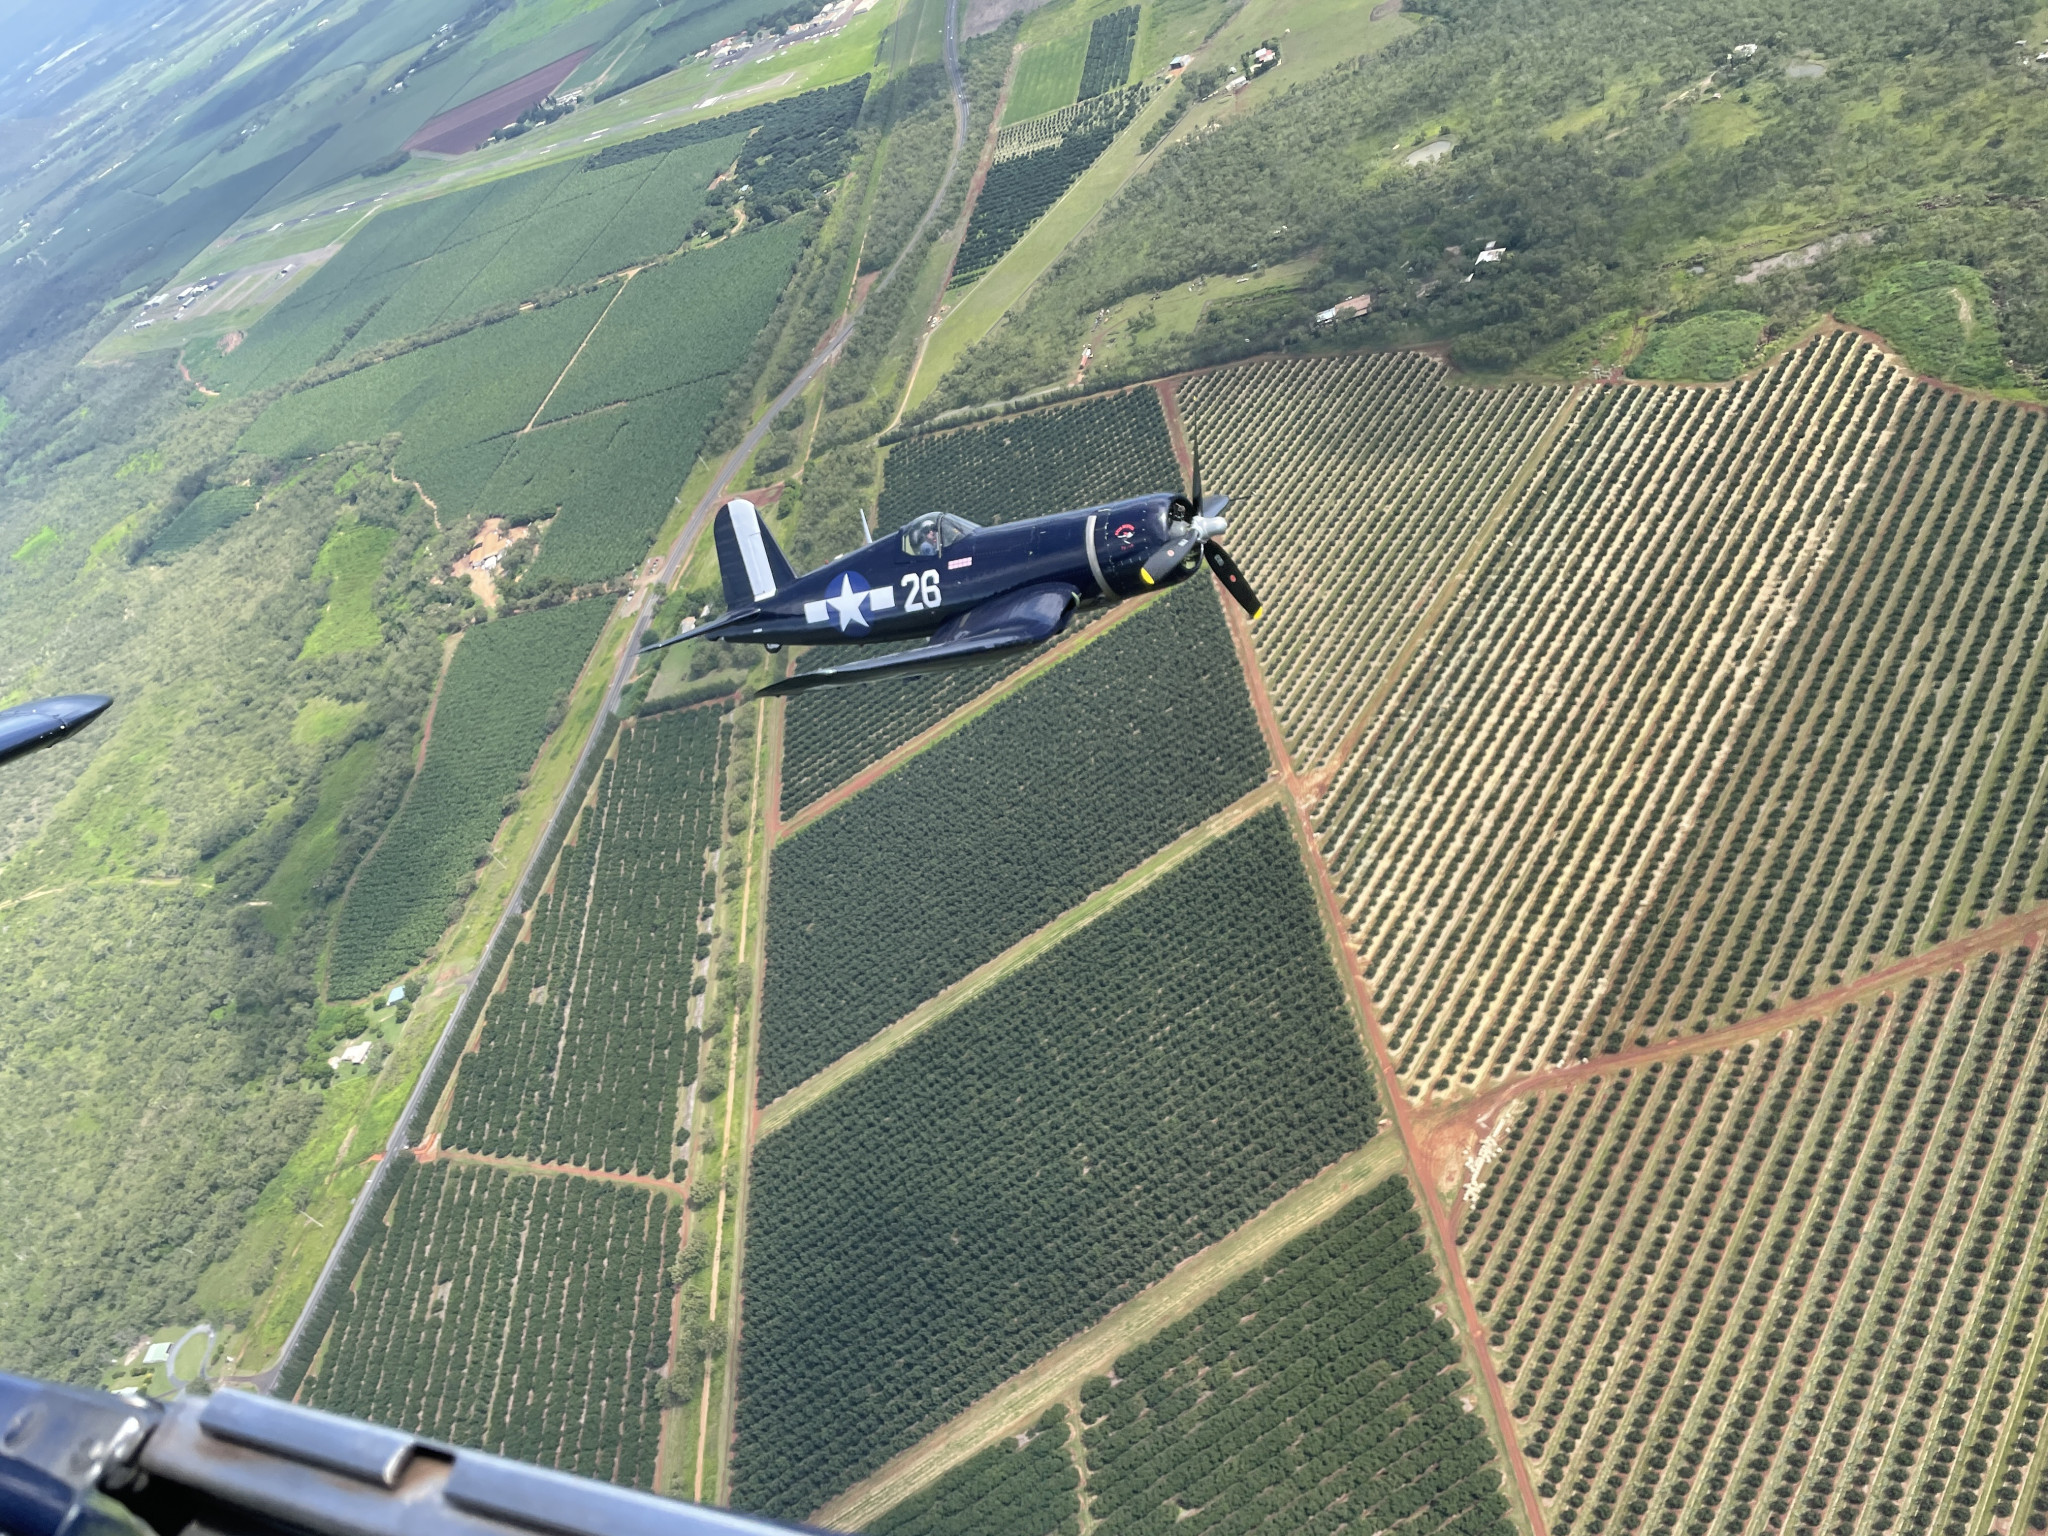 The Corsair during a flight above the farming lands over Mareeba. The brilliant blue Corsair is a WWII plane that was in the Battle of Okinawa during the end of the war and defeated its enemies with ease.